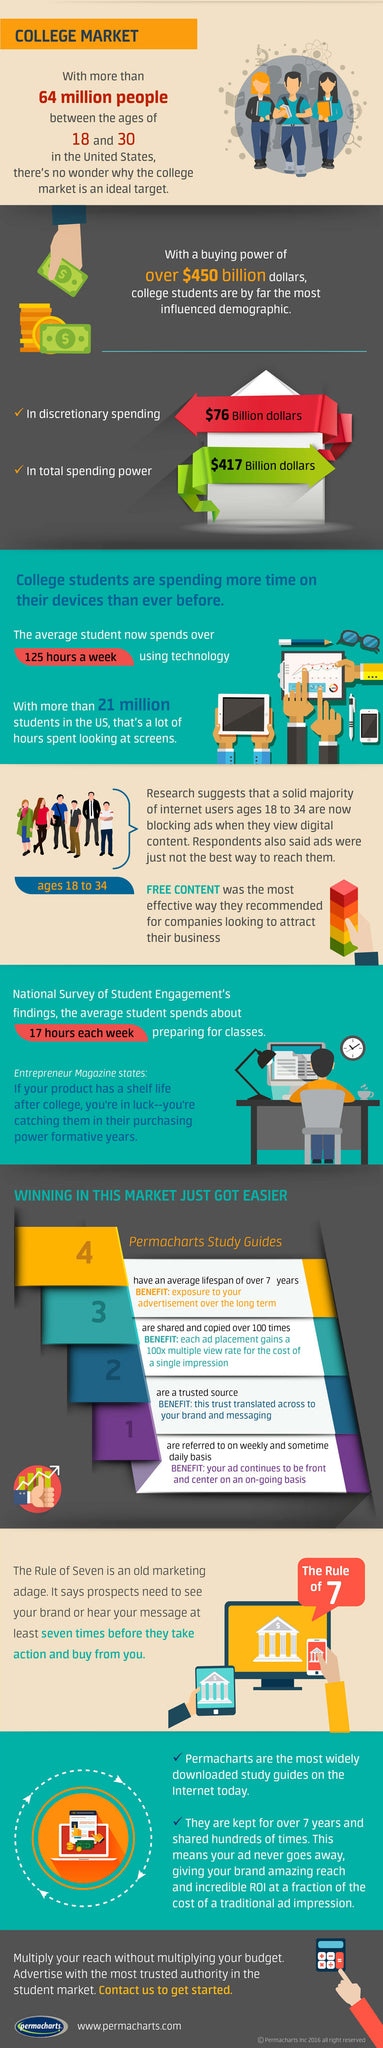 Student market info graphic from Permacharts.com